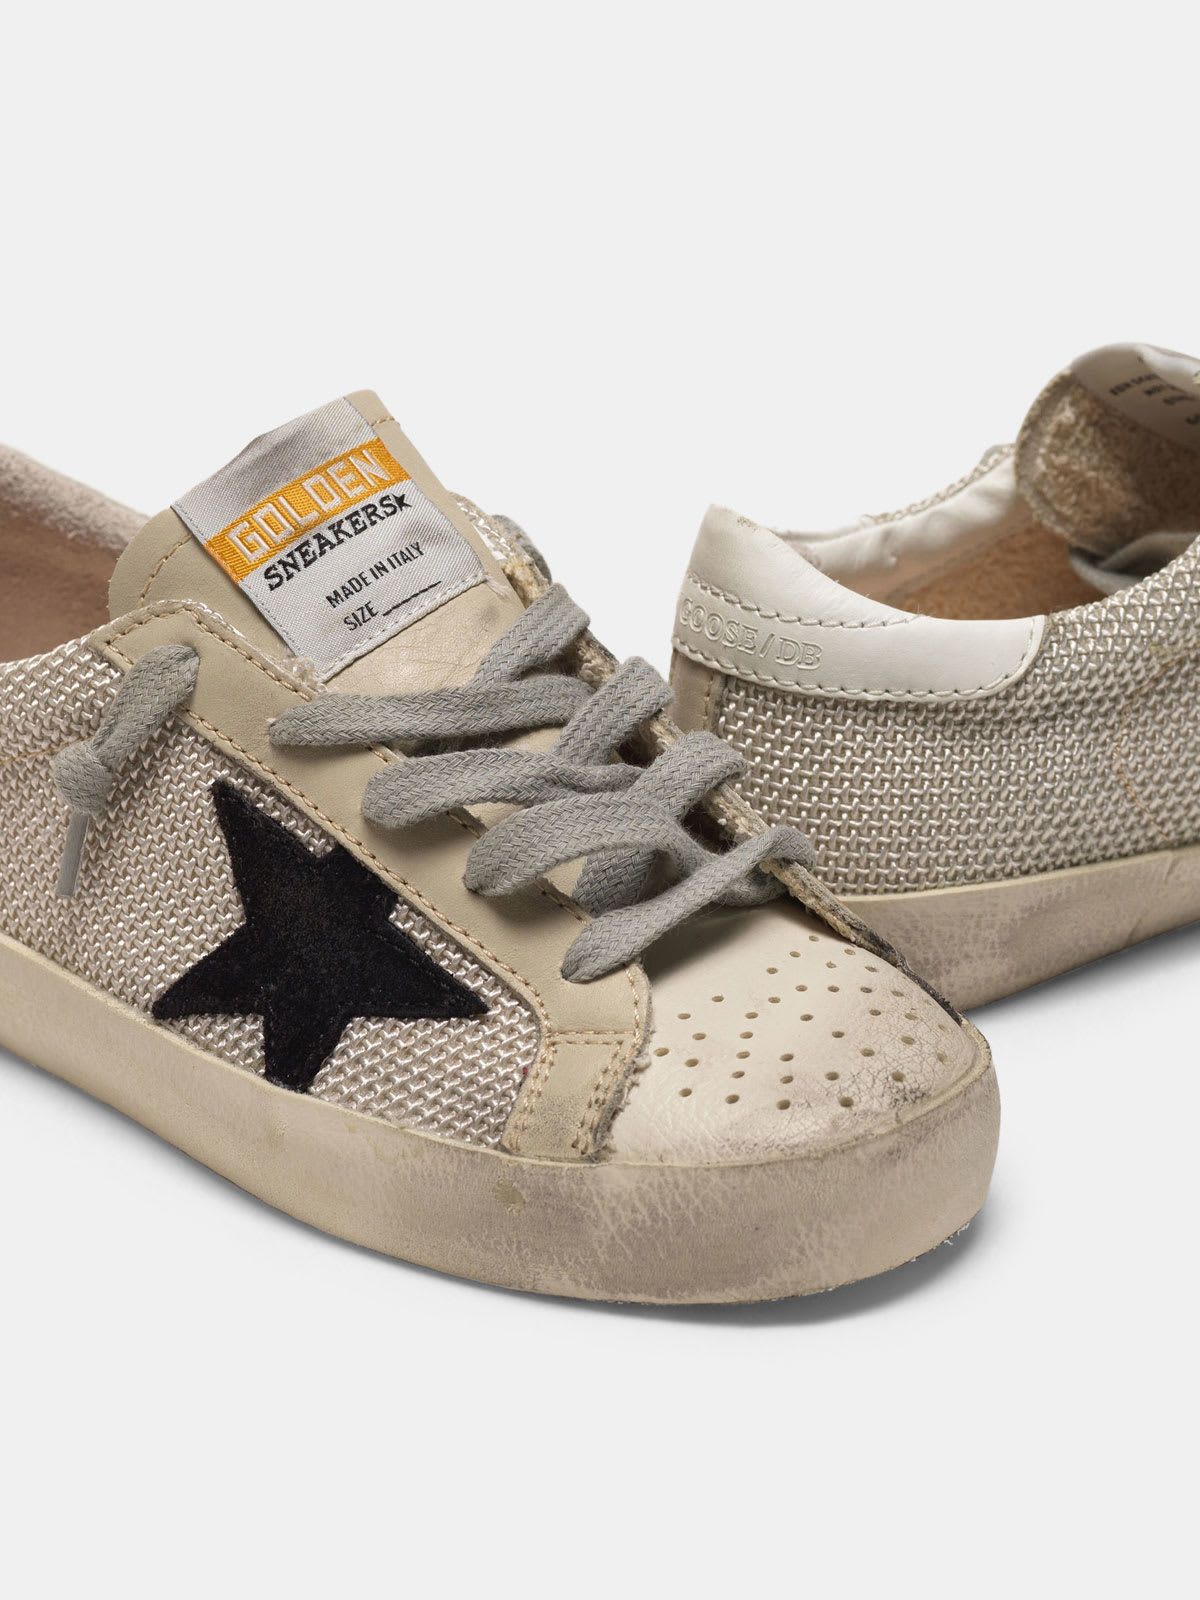 Superstar sneakers in hi-tech fabric with nubuck star